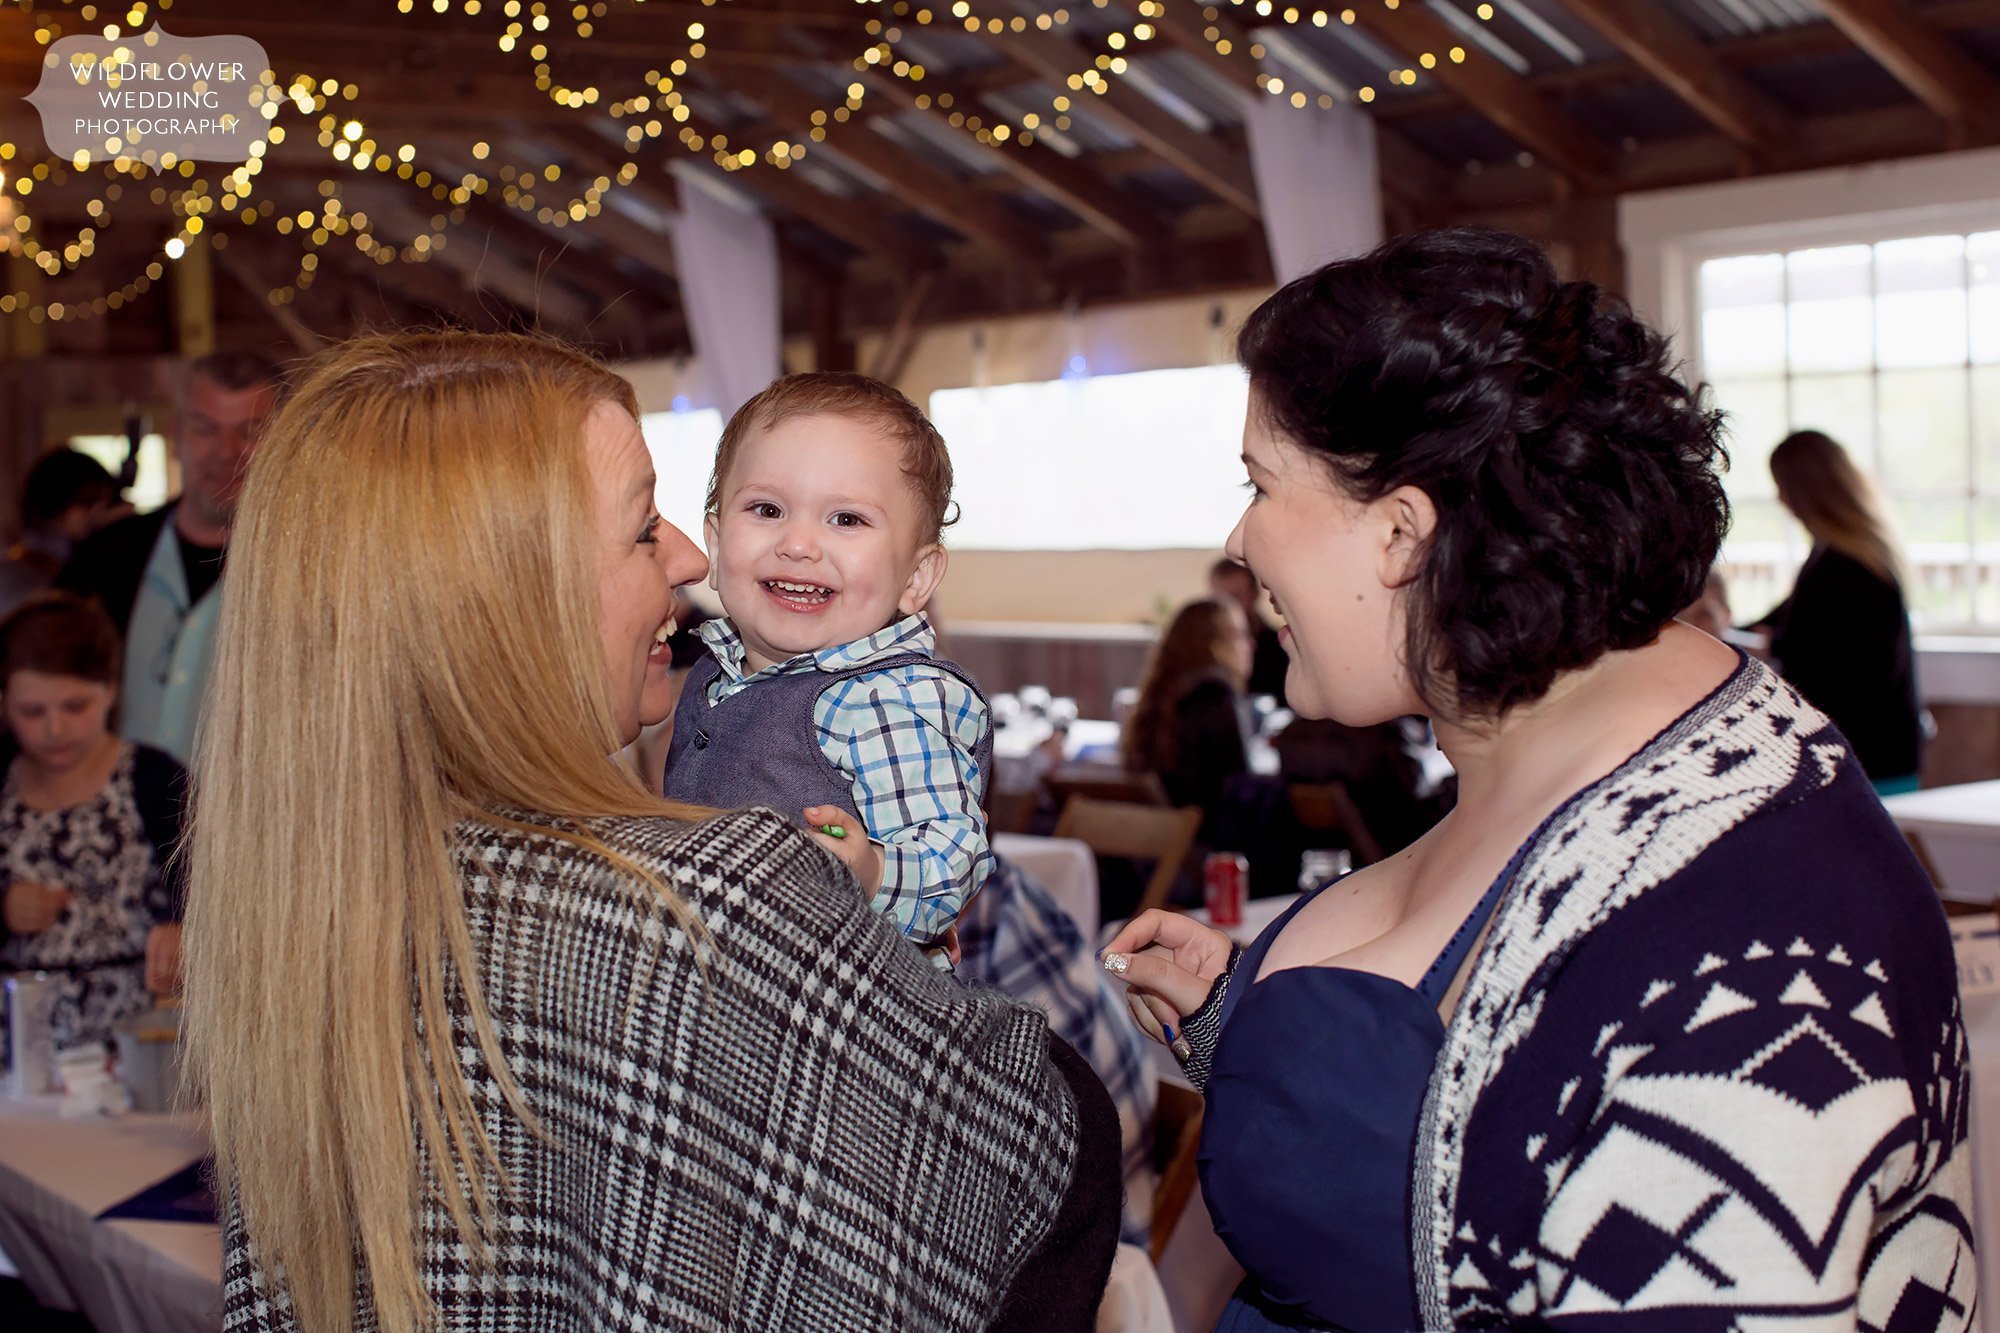 Sweet photo of a baby at this rustic wedding in Weston, MO.